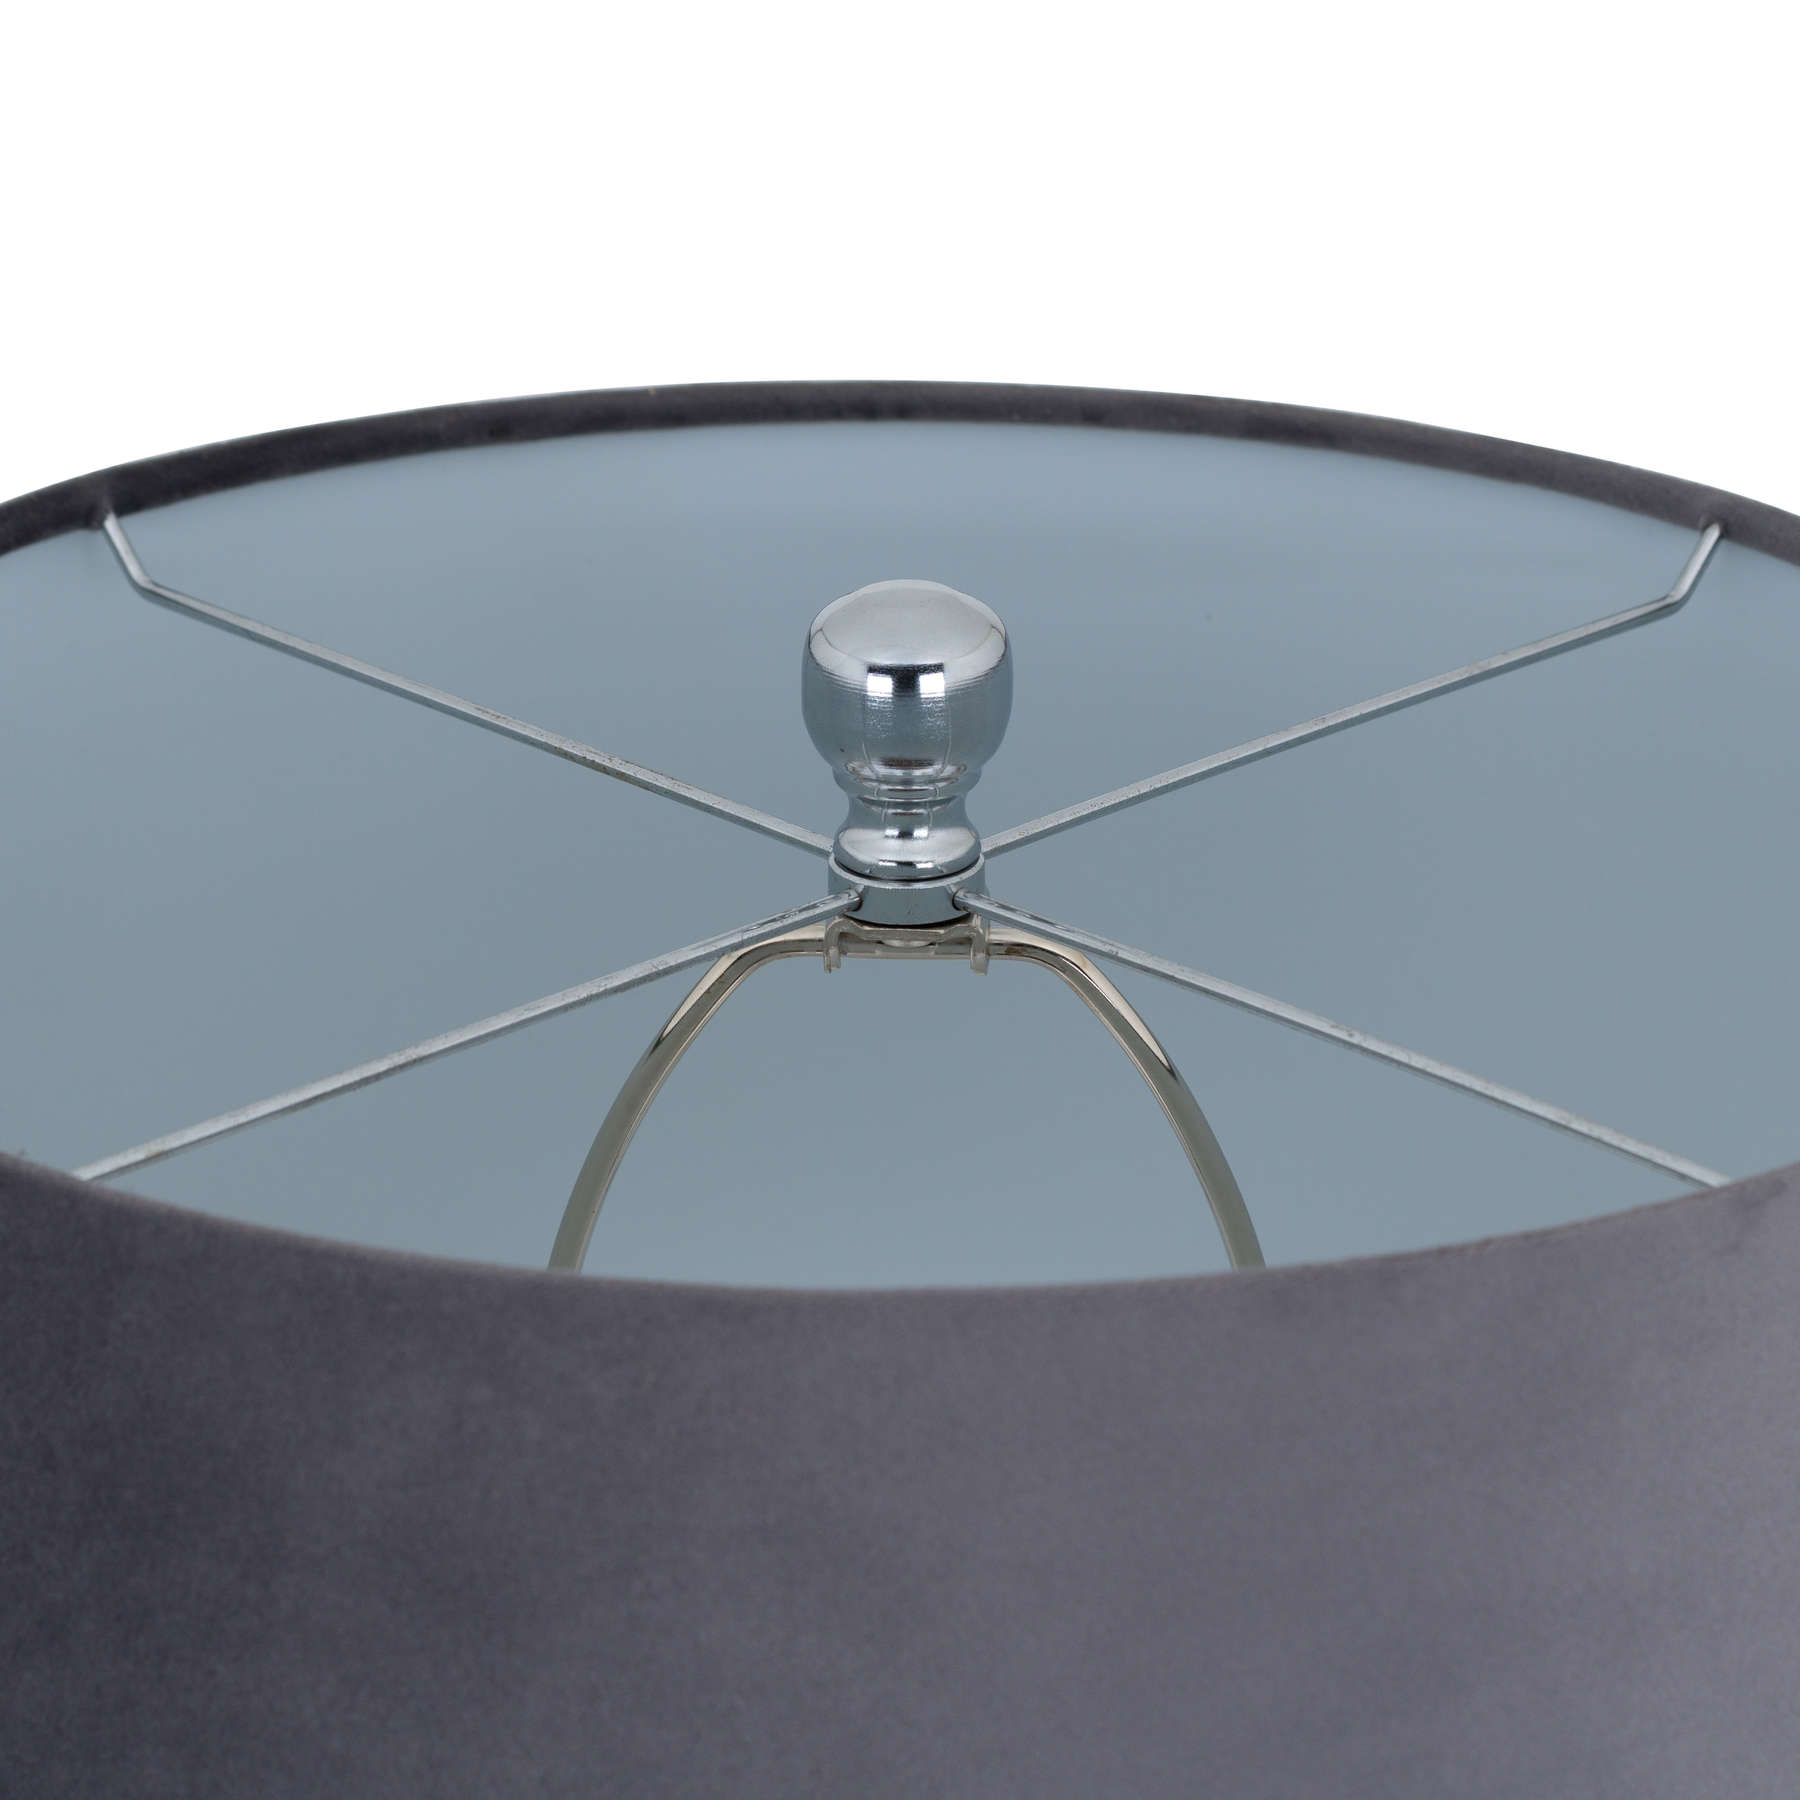 Ashby Glass Table Lamp - Image 3